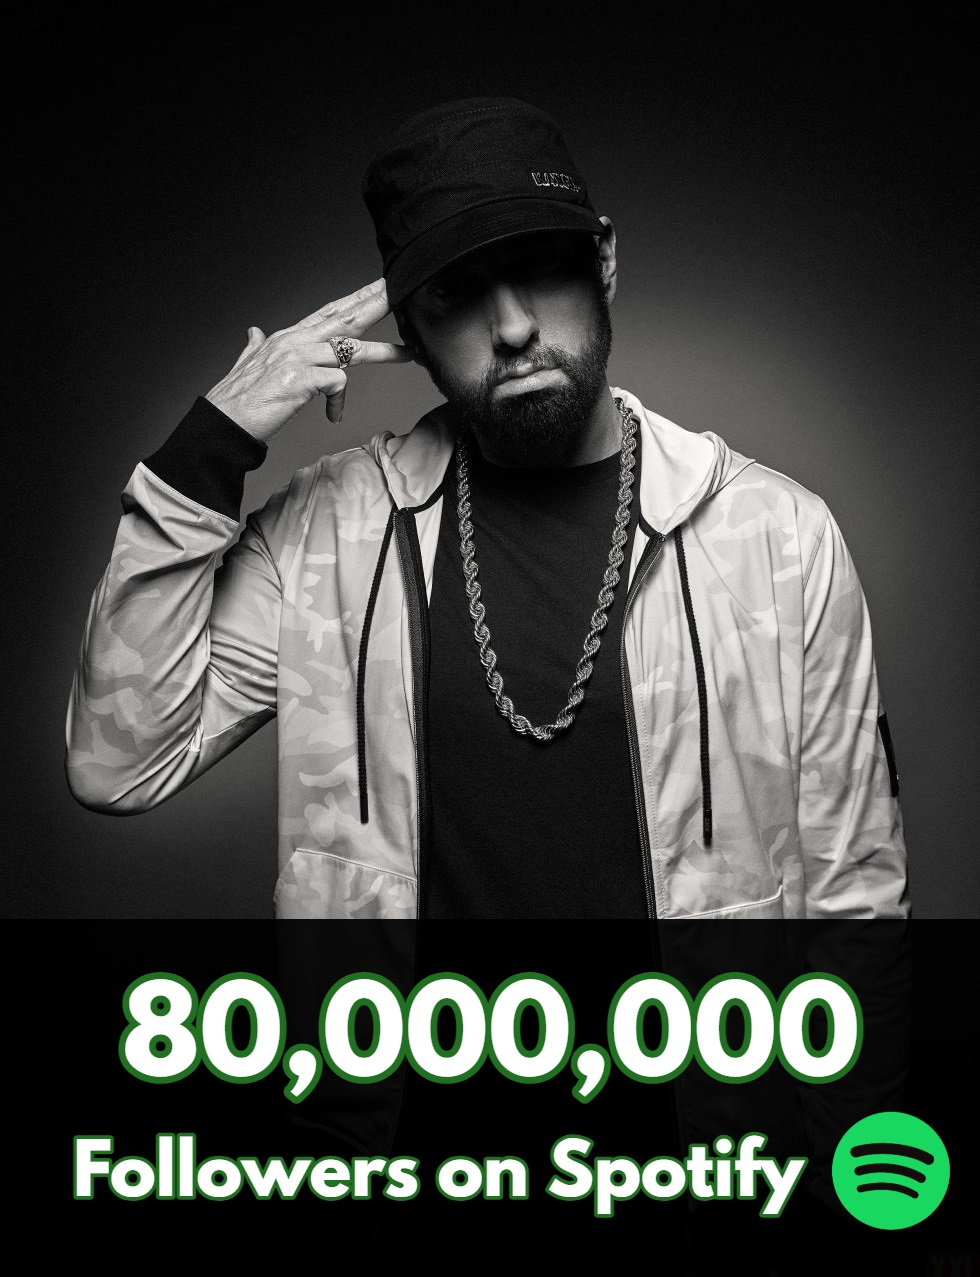 Shady Times on X: "Eminem has now surpassed 80 Million Followers on @Spotify He is the 2nd most-followed Rapper on the platform and 7th Artist overall. https://t.co/ioqq3x2Nh1" / X